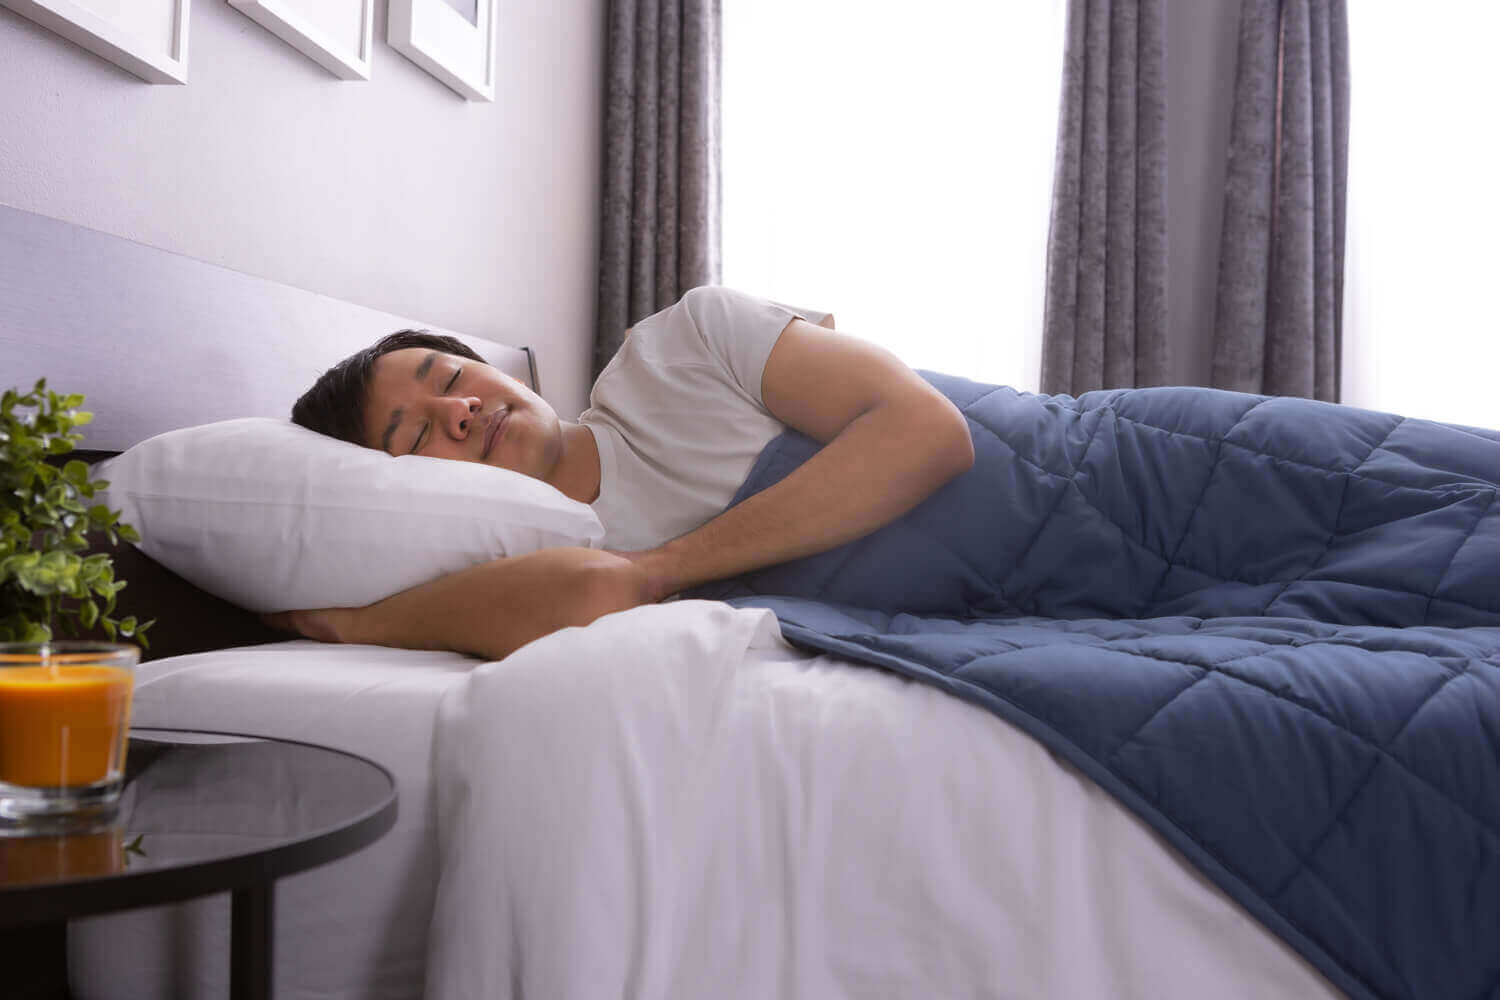 Man peacefully resting in bed, with Weighted Blanket spread across his body 